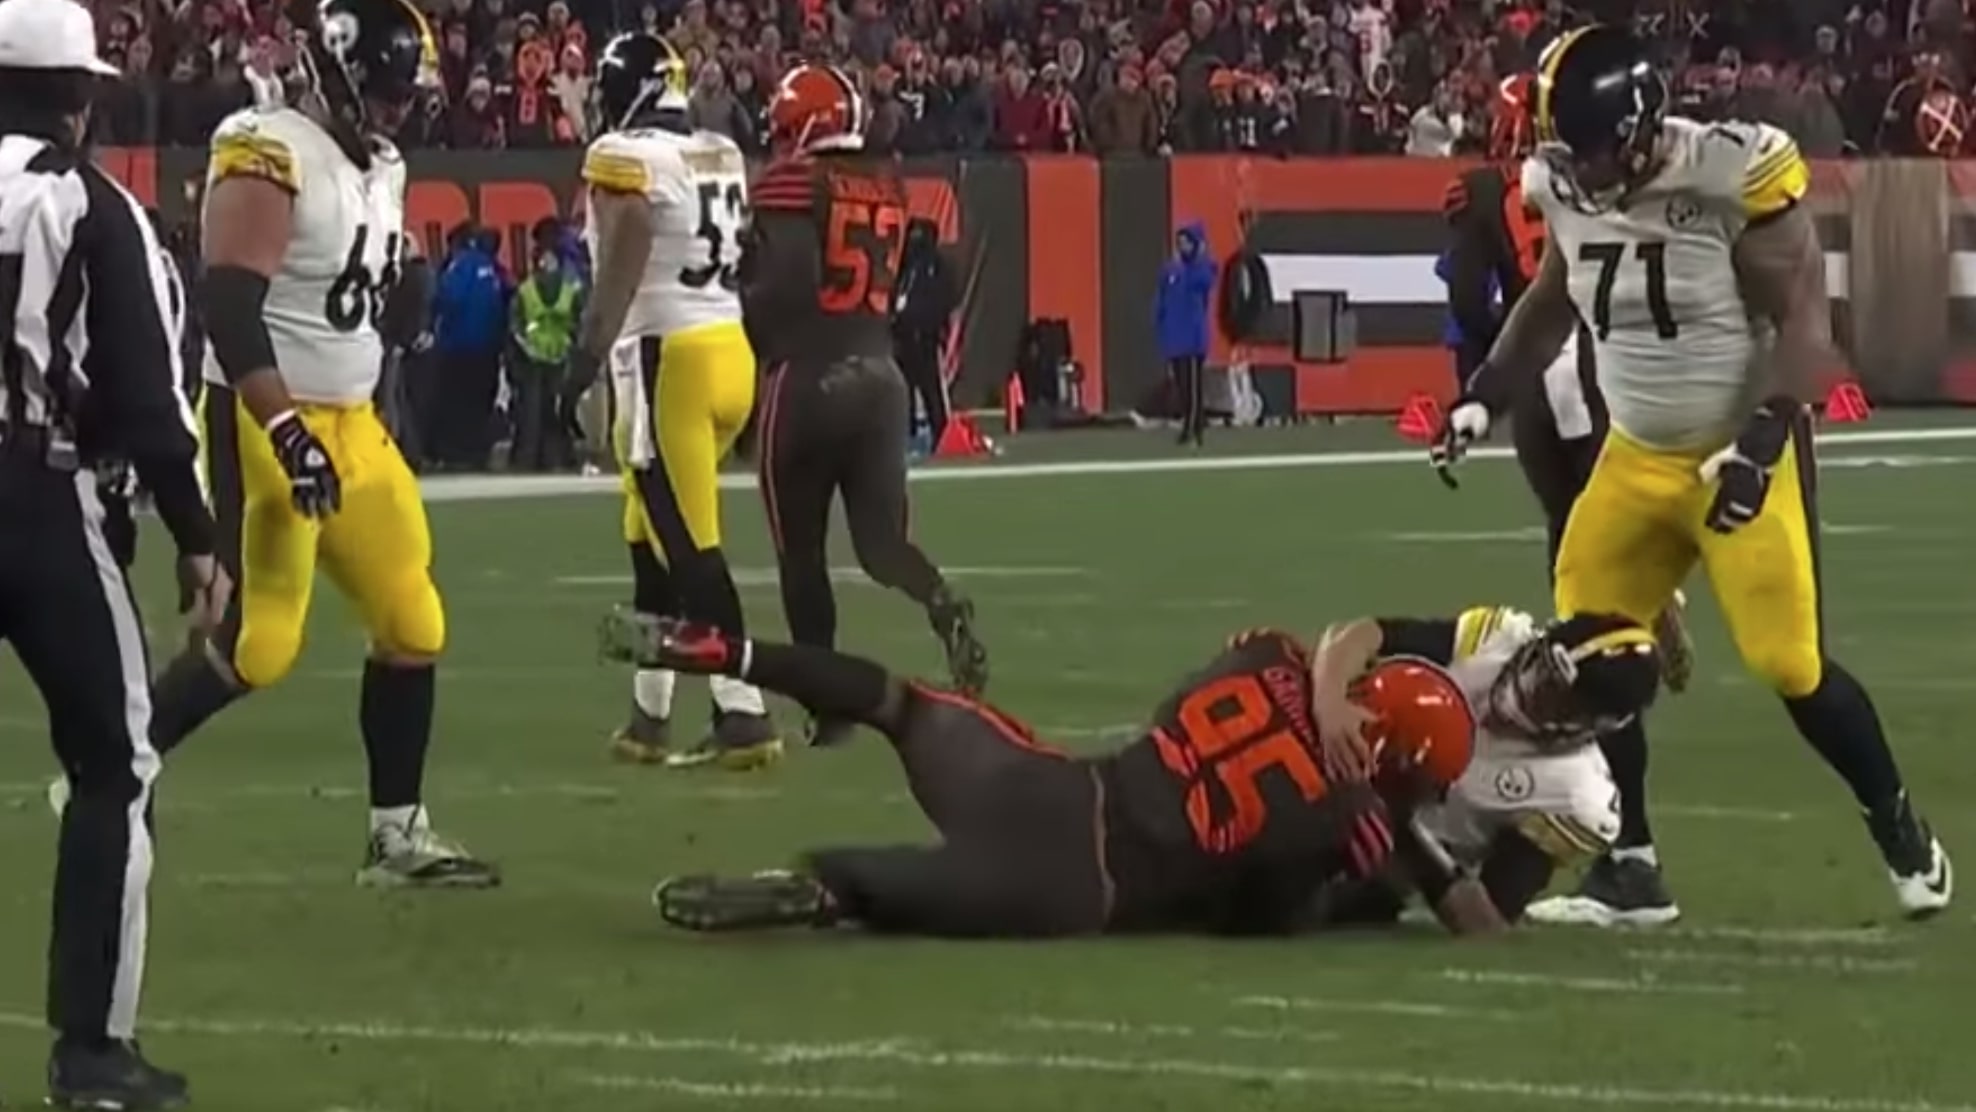 NFL suspends Browns player for swinging helmet at opponent, police not  pursuing charges